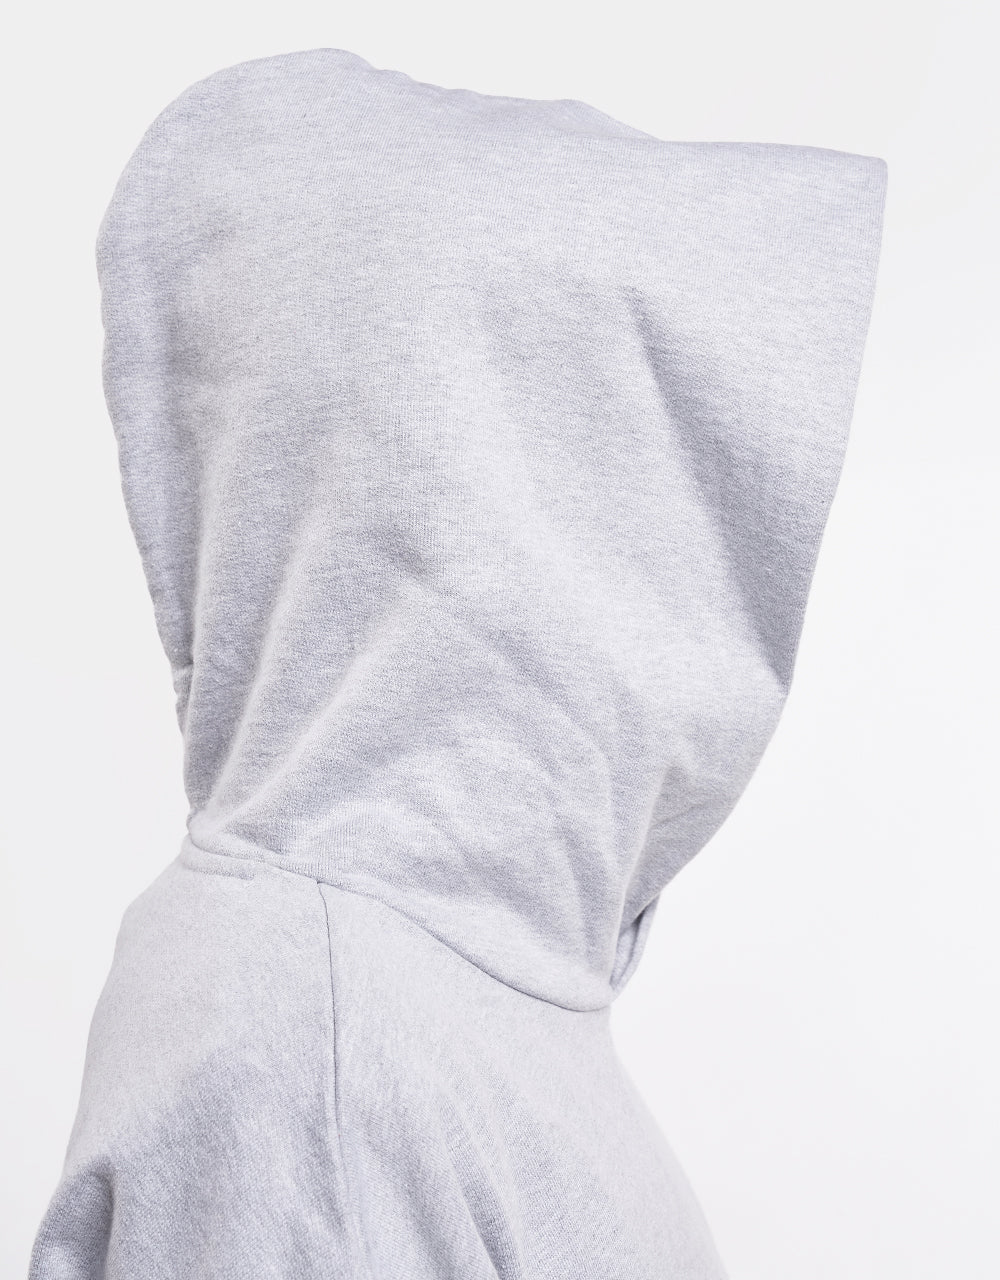 Tired Tired'S Pullover Hoodie - Heather Grey